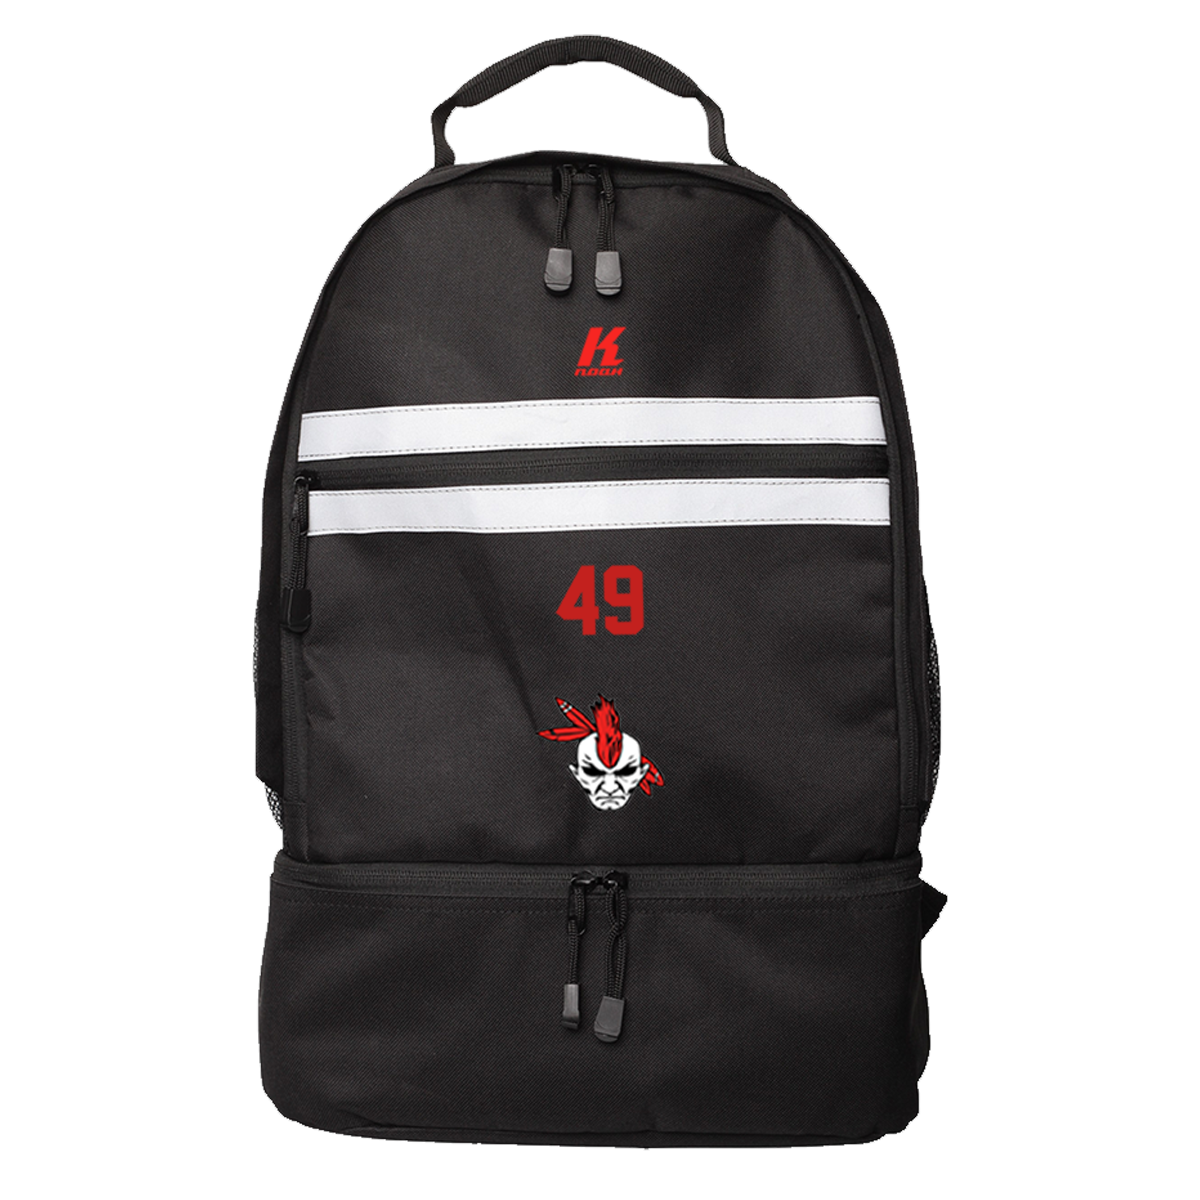 Warriors Players Backpack with Playernumber or Initials